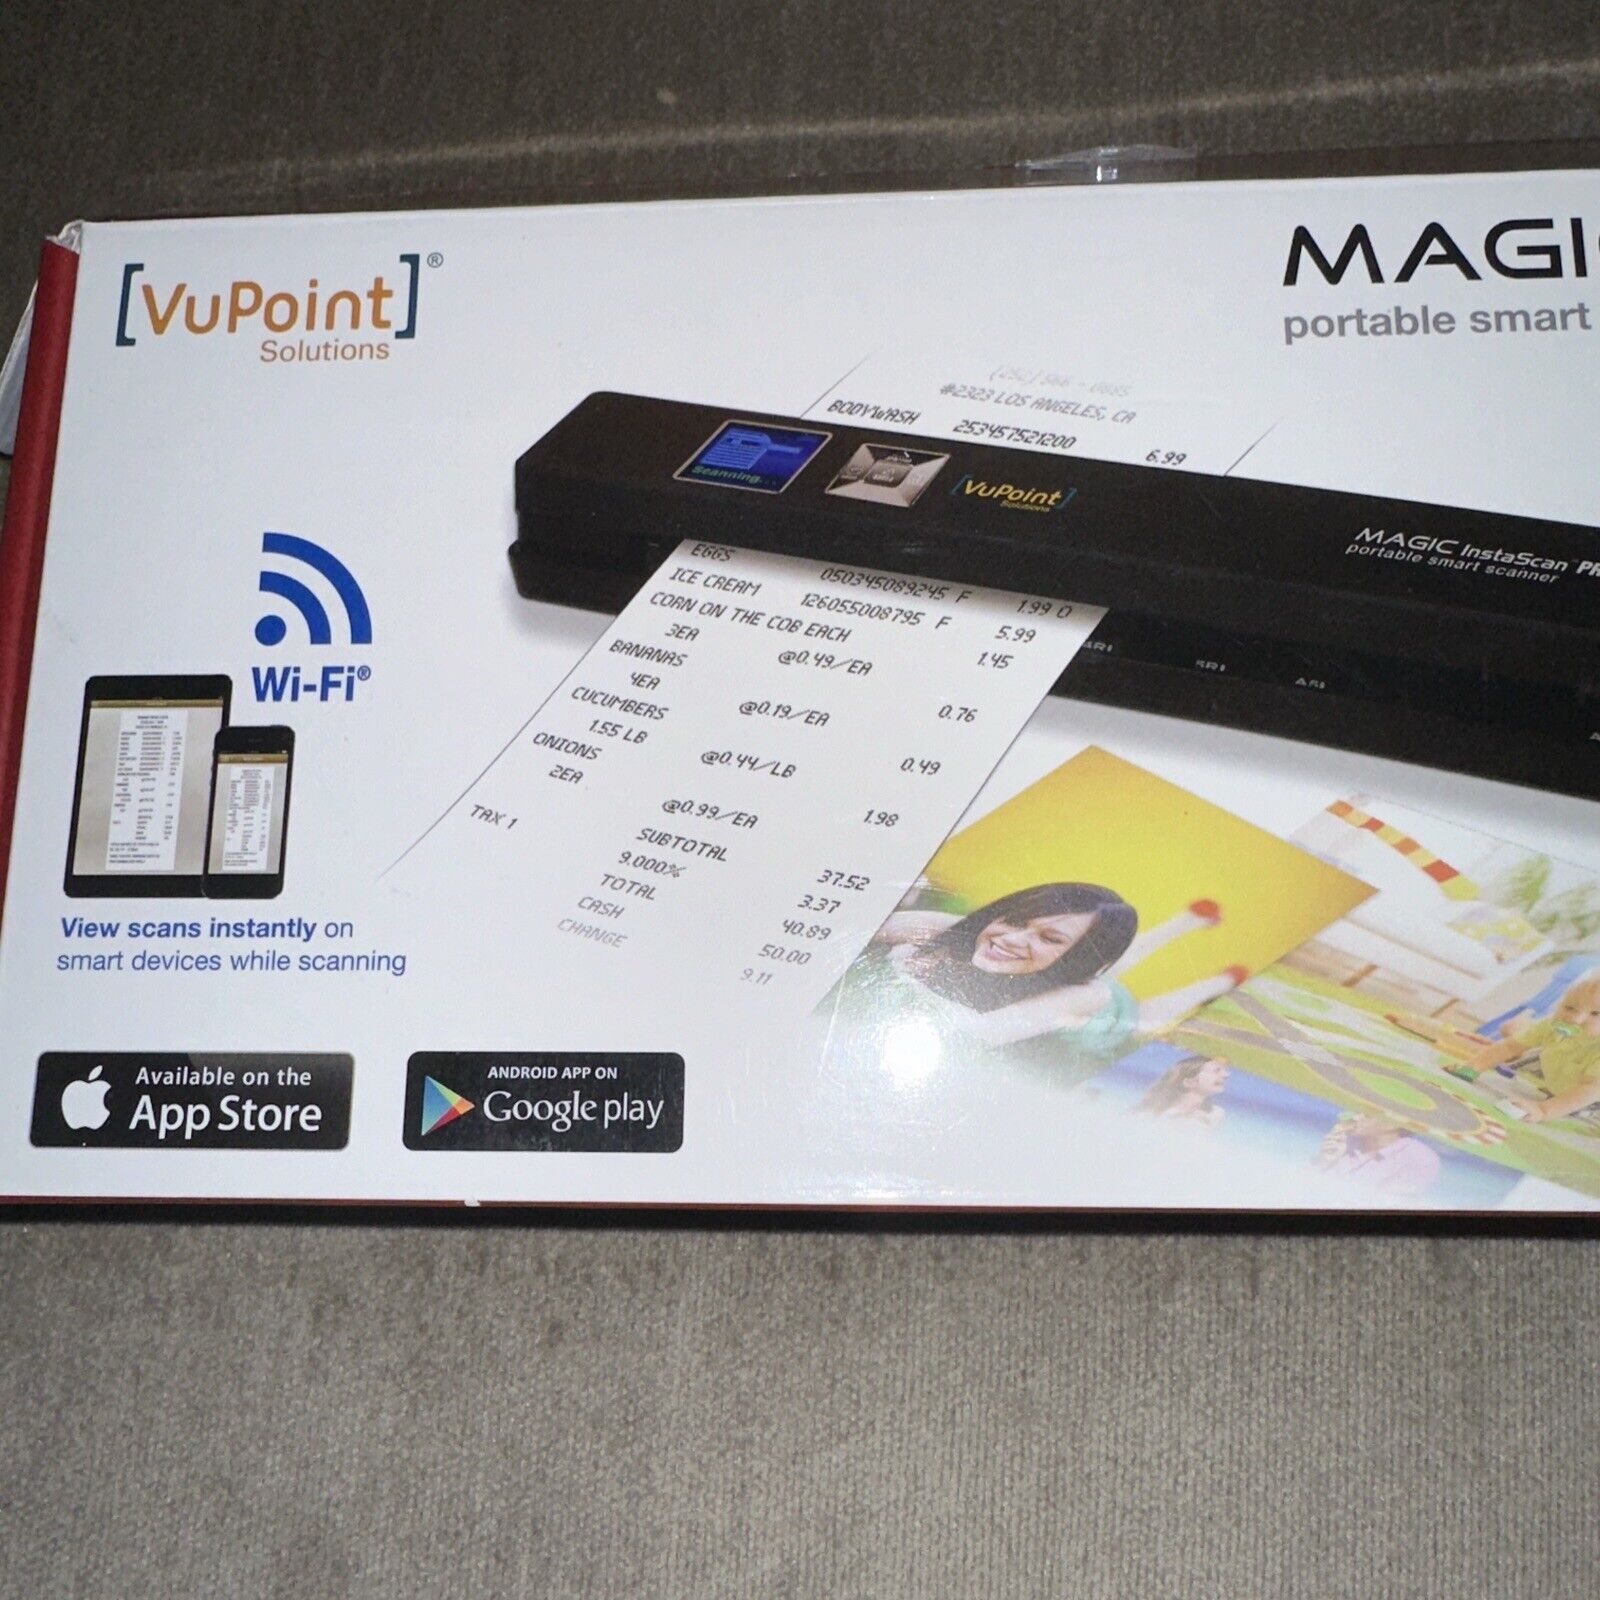 VuPoint MAGIC InstaScan Pro Wi-Fi Portable Smart Scanner PDSWF-ST48R-VP New